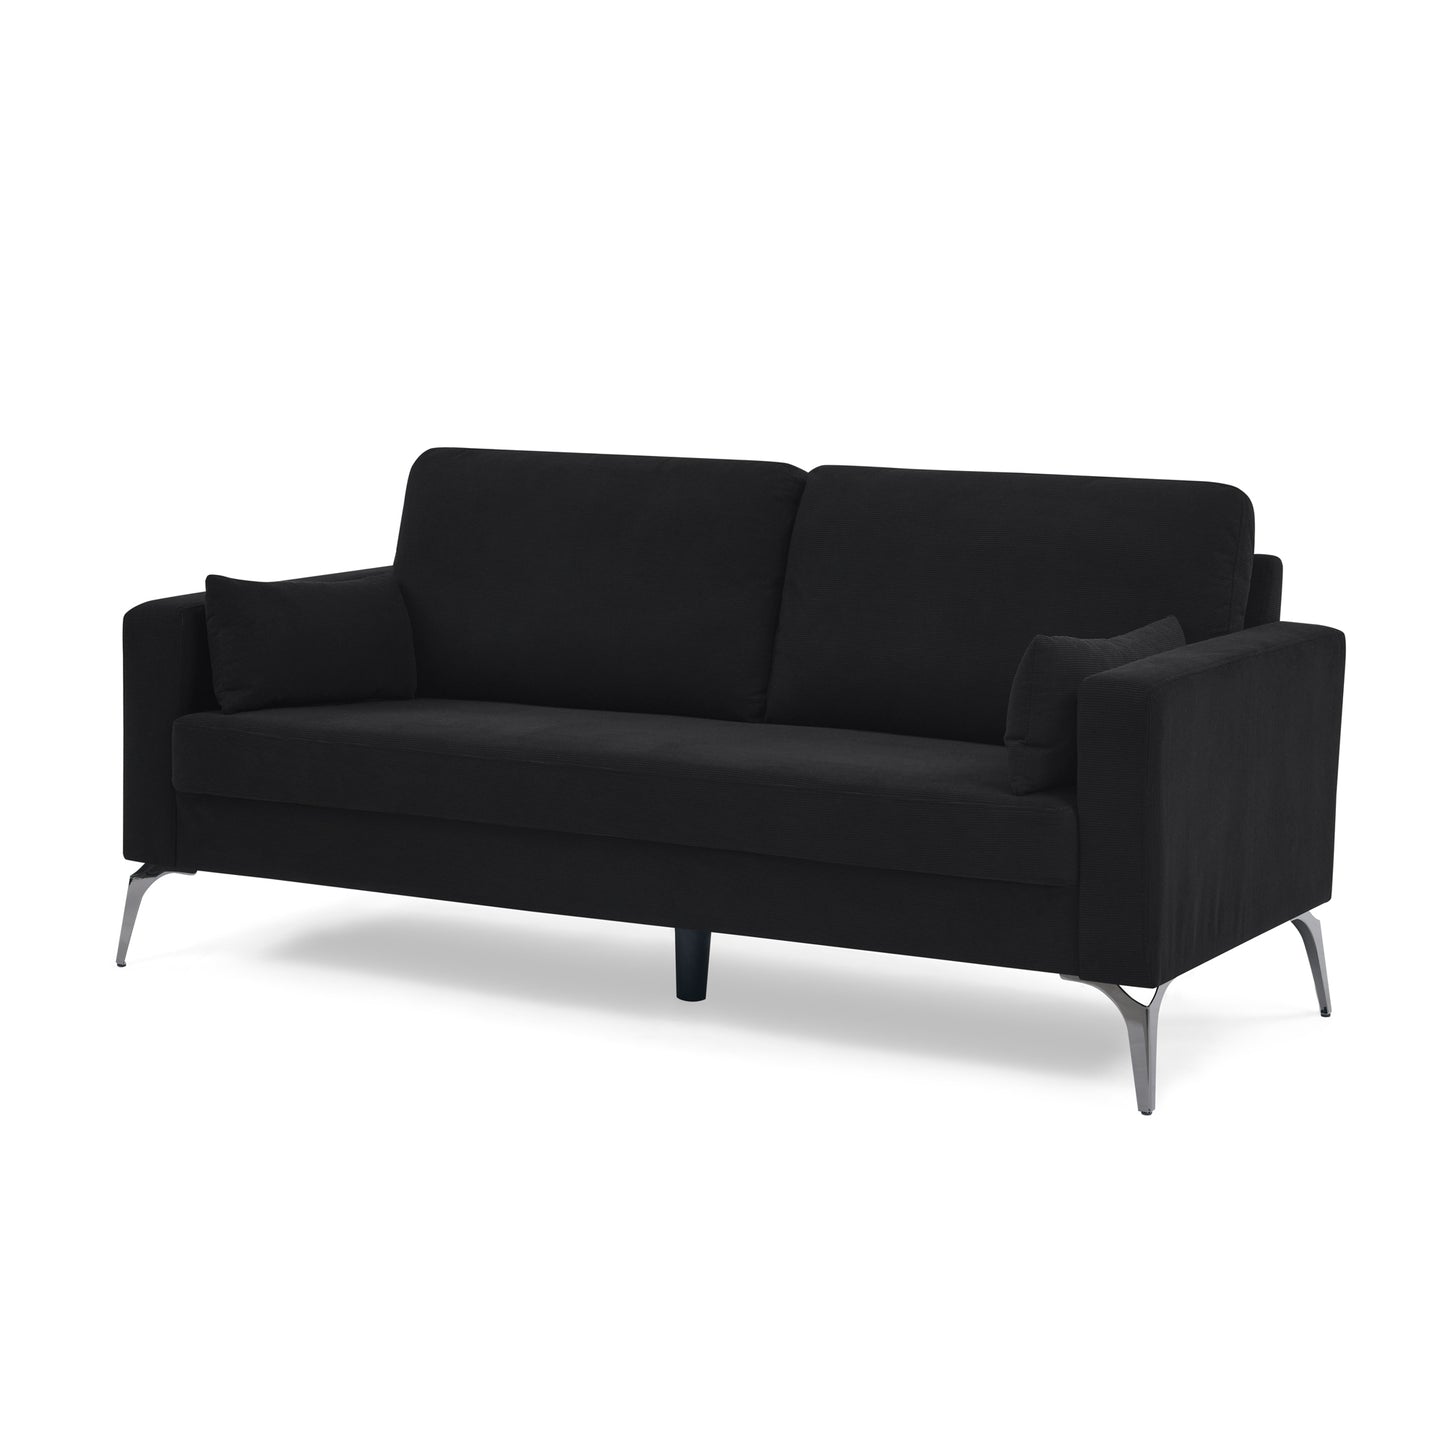 3 Piece Living Room Sofa Set, including 3-Seater Sofa, Loveseat and Sofa Chair, with Two Small Pillows, Corduroy Black